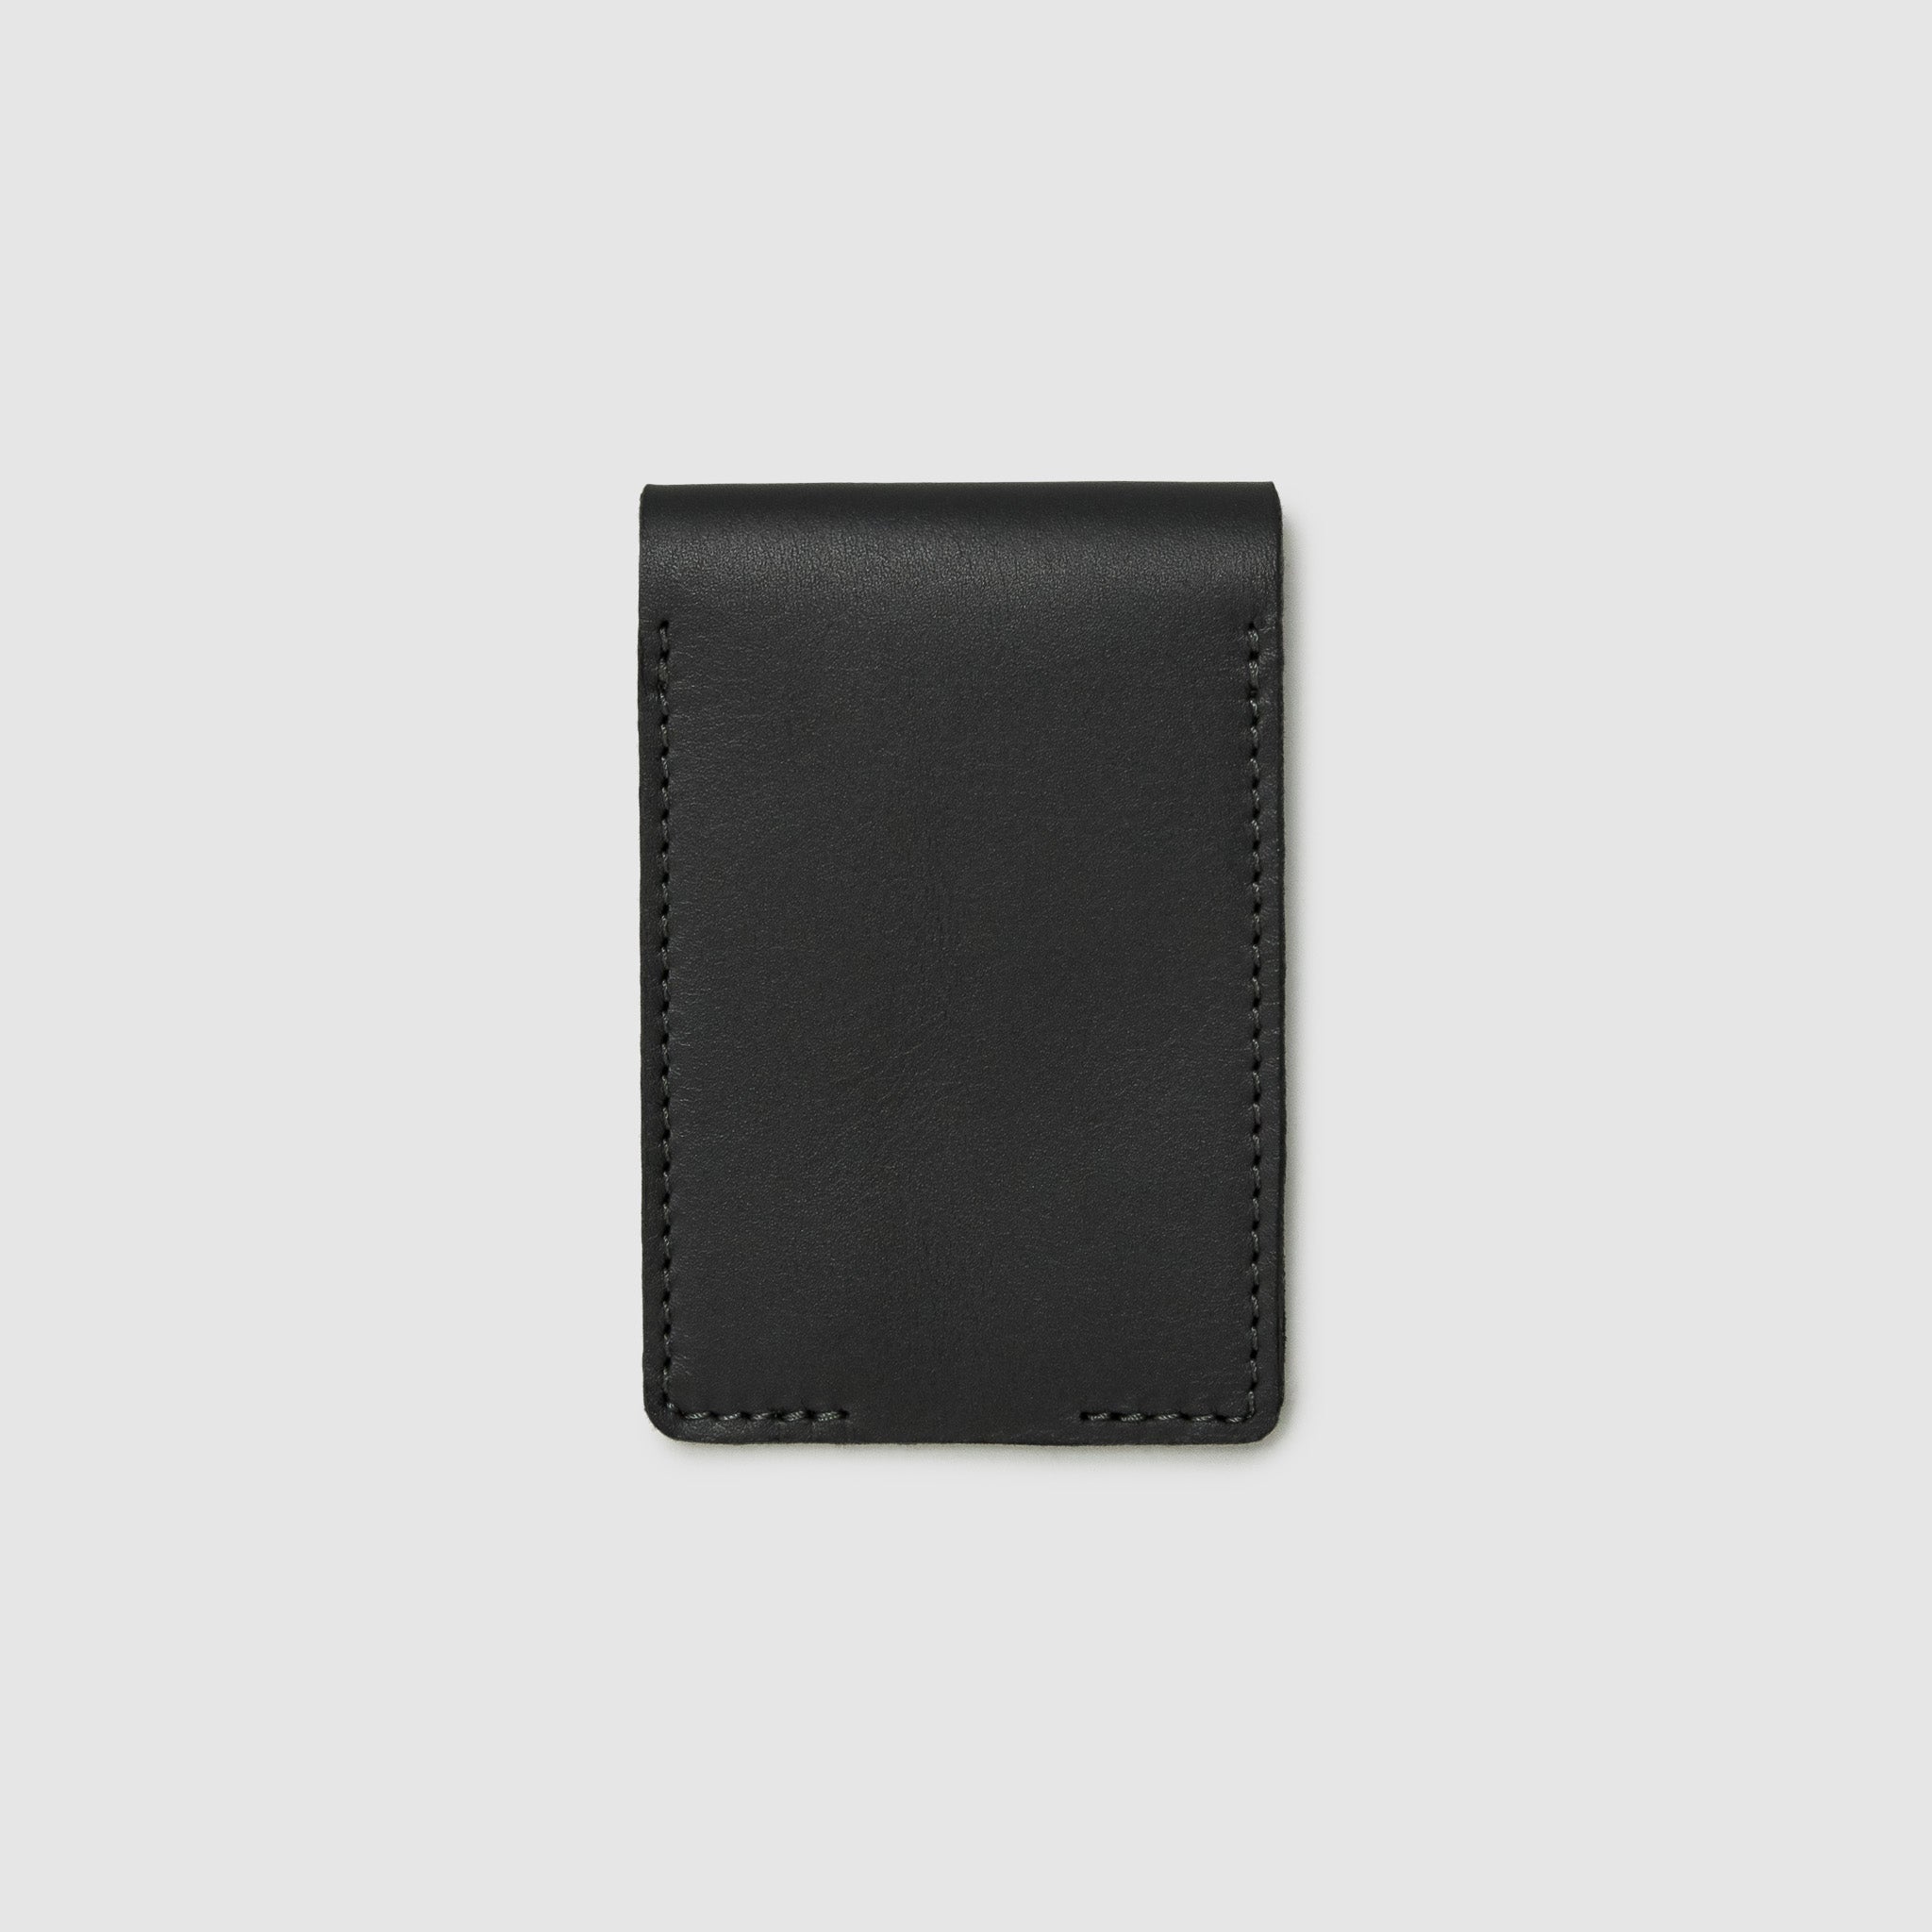 Anson Calder bifold or business card Wallet RFID french calfskin leather _black